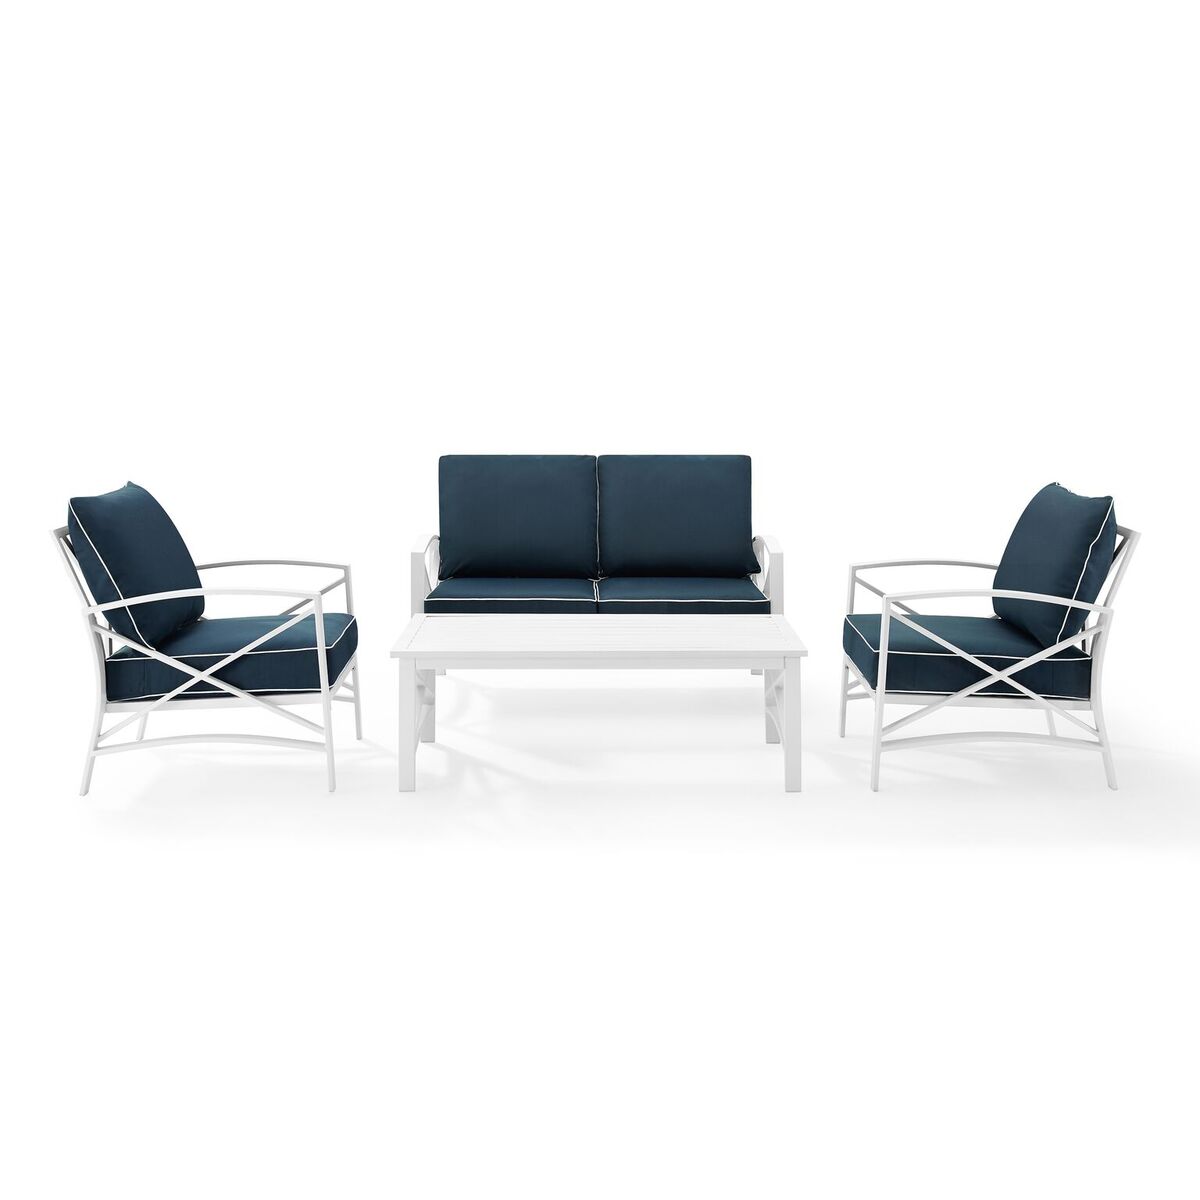 Ko60009wh-nv Kaplan 4-piece Outdoor Seating Set In White With Navy Cushions